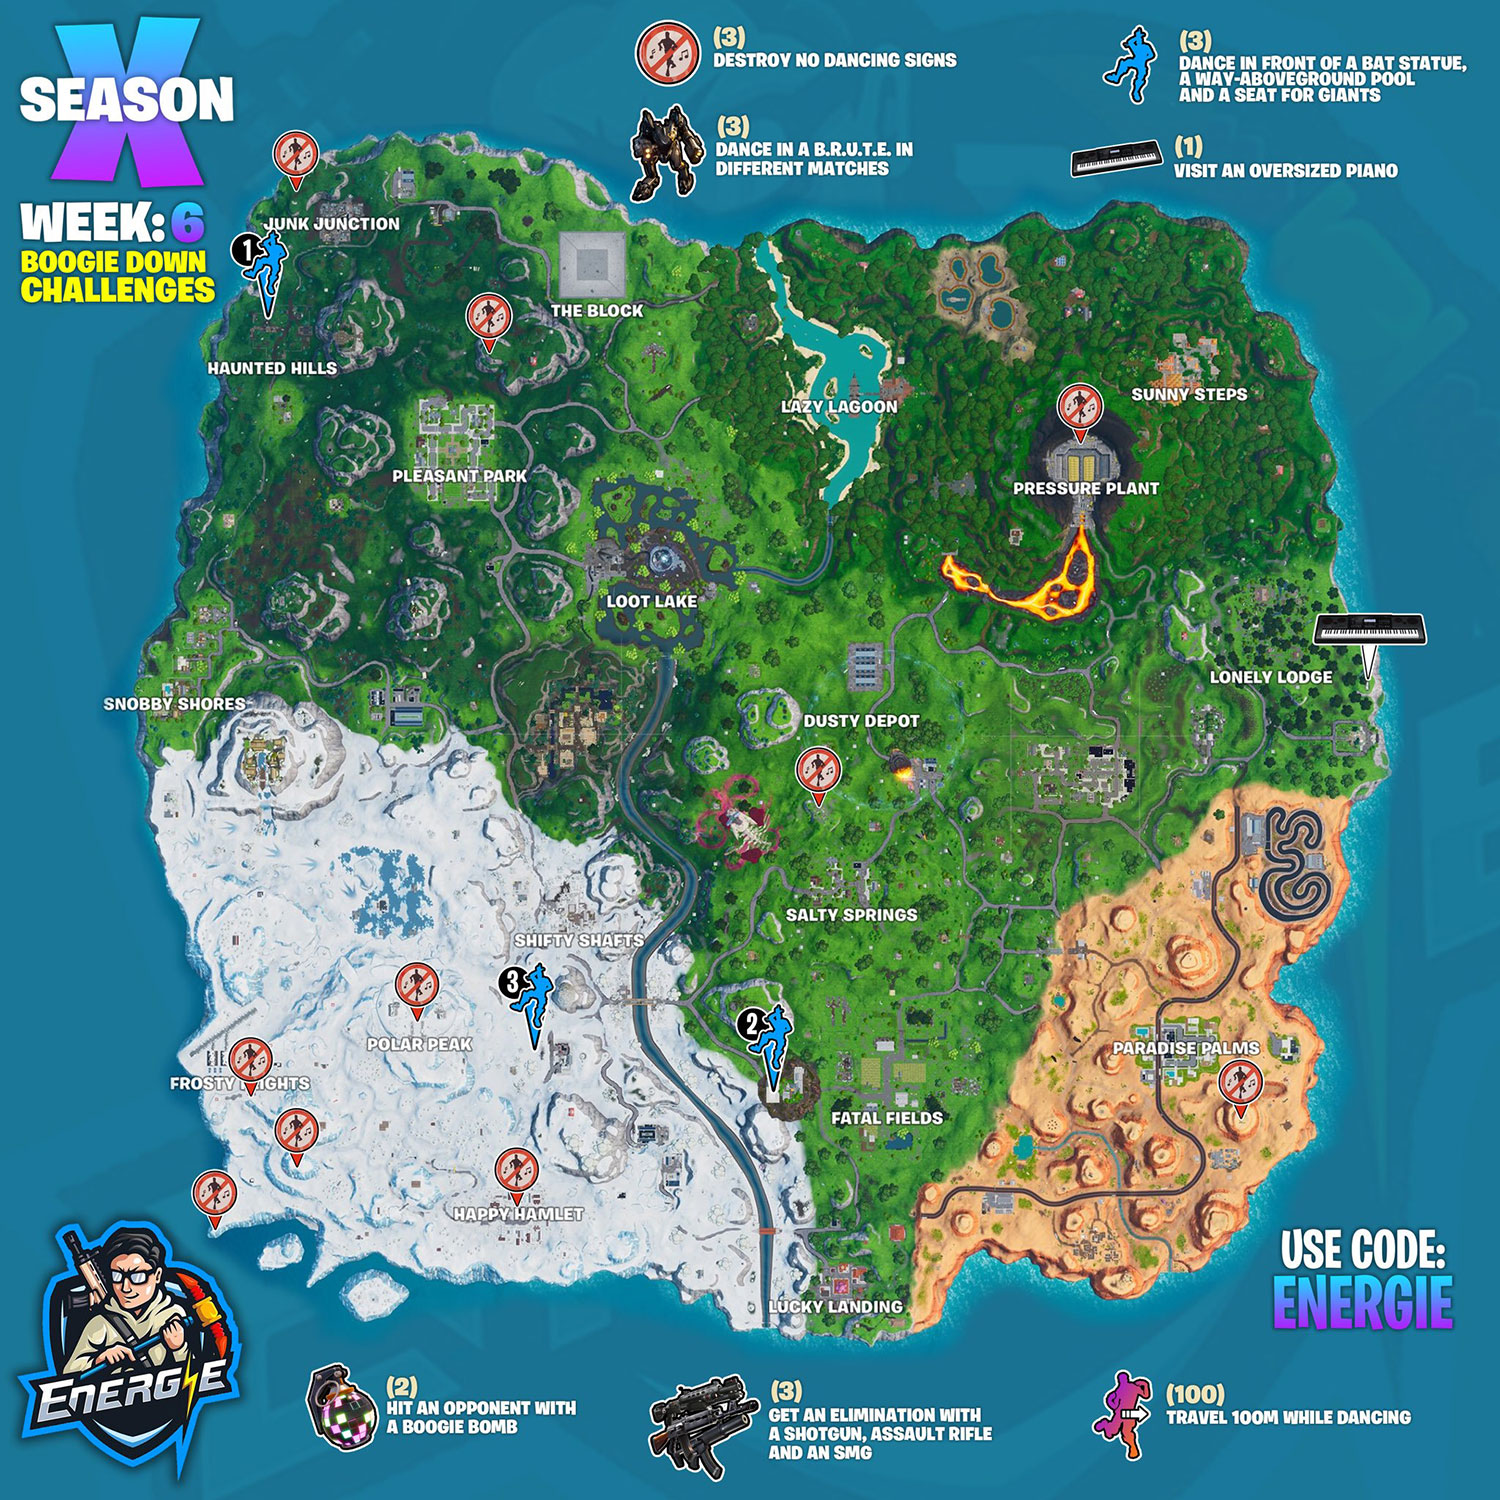 Fortnite Boogie Down Challenges Guide Cheat Sheet Missions